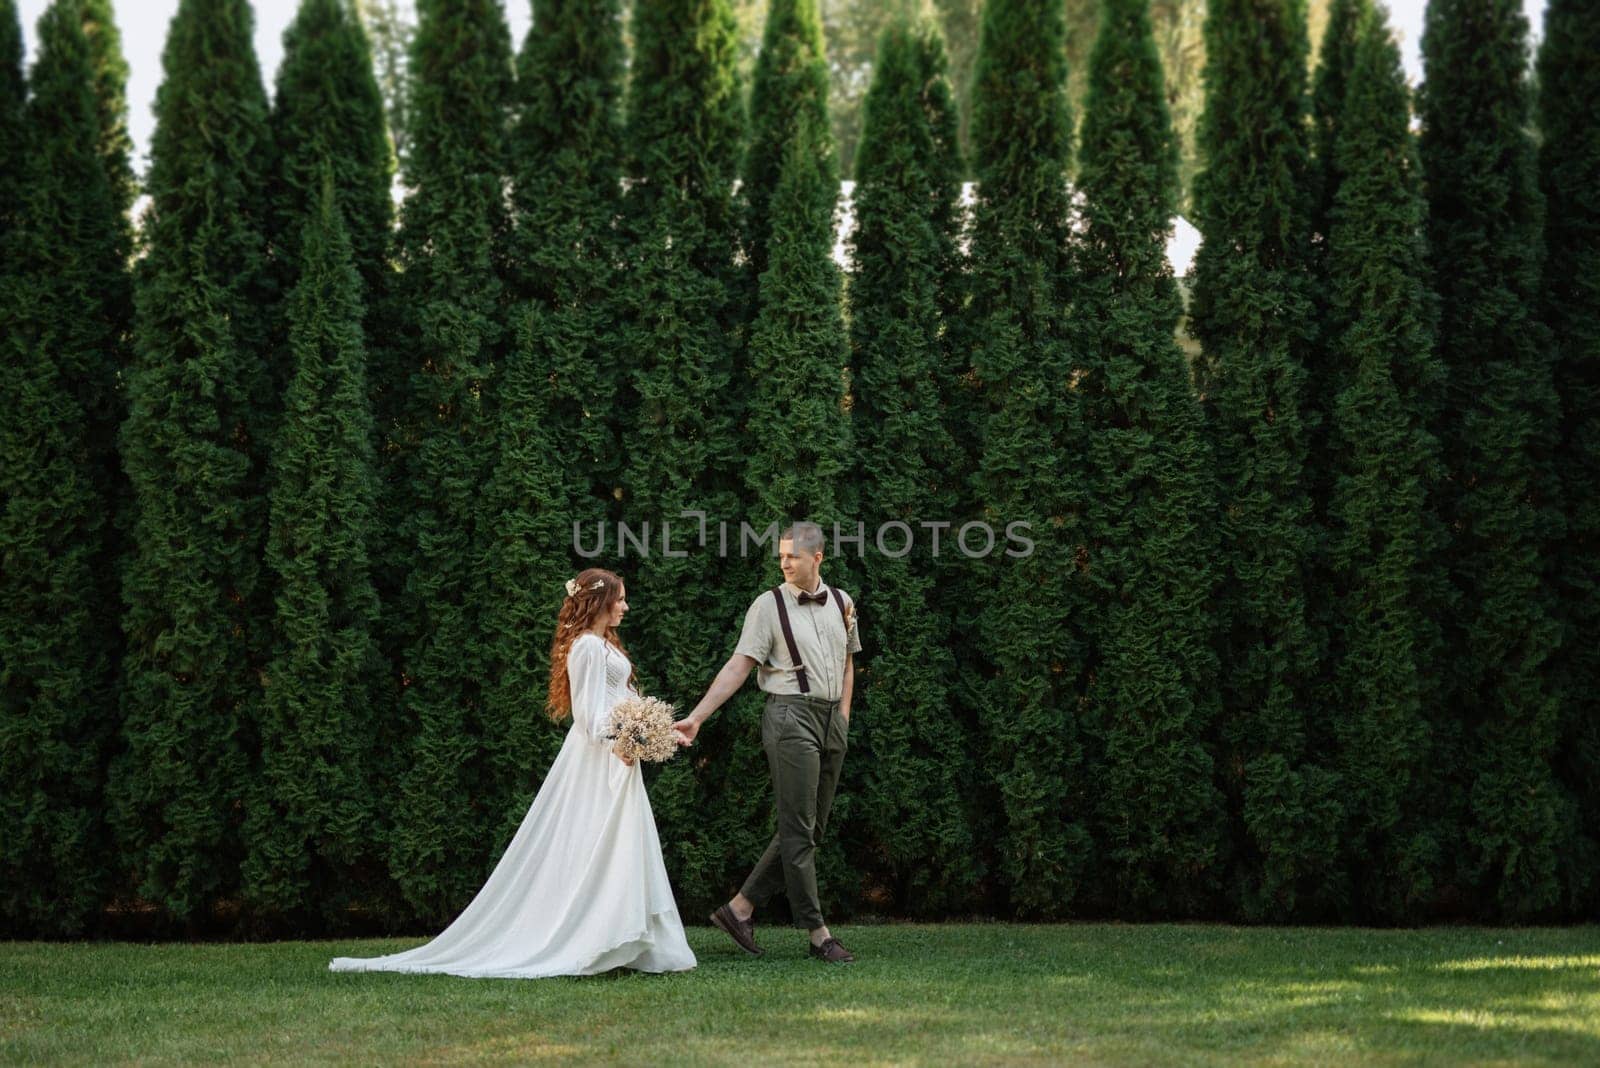 wedding walk of the bride and groom in a coniferous by Andreua